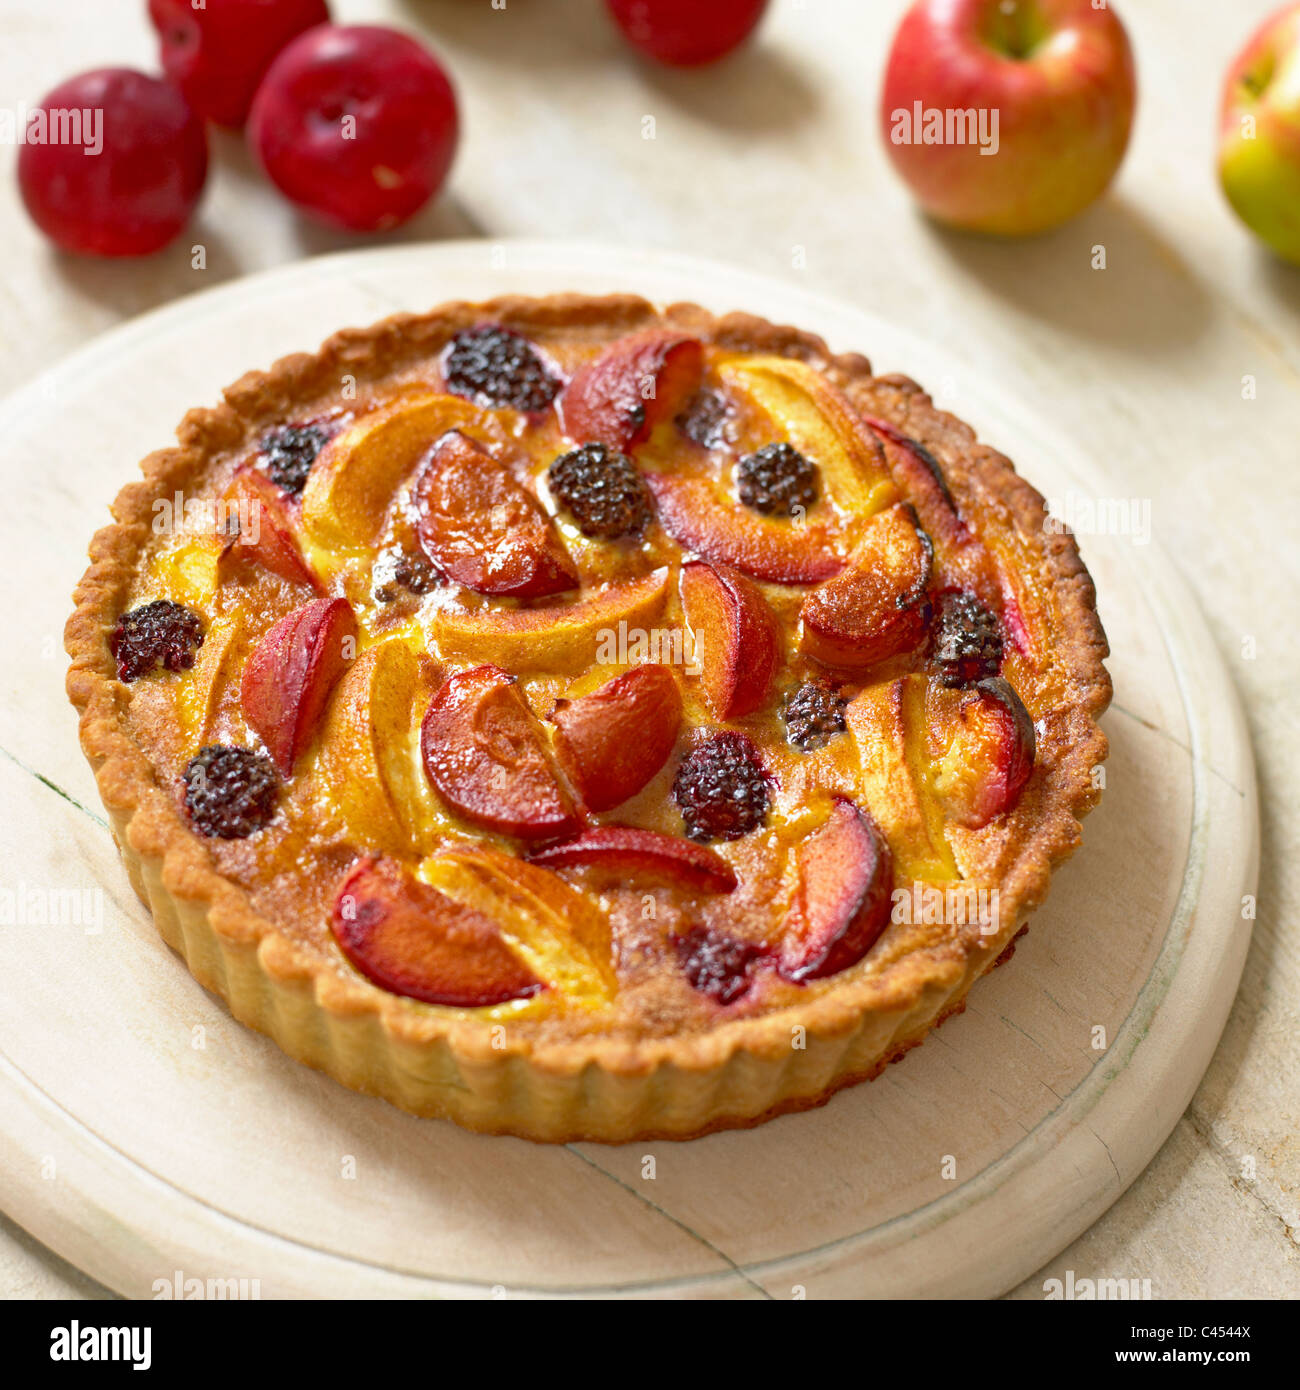 Apple and plum tart on chopping board, close-up Stock Photo